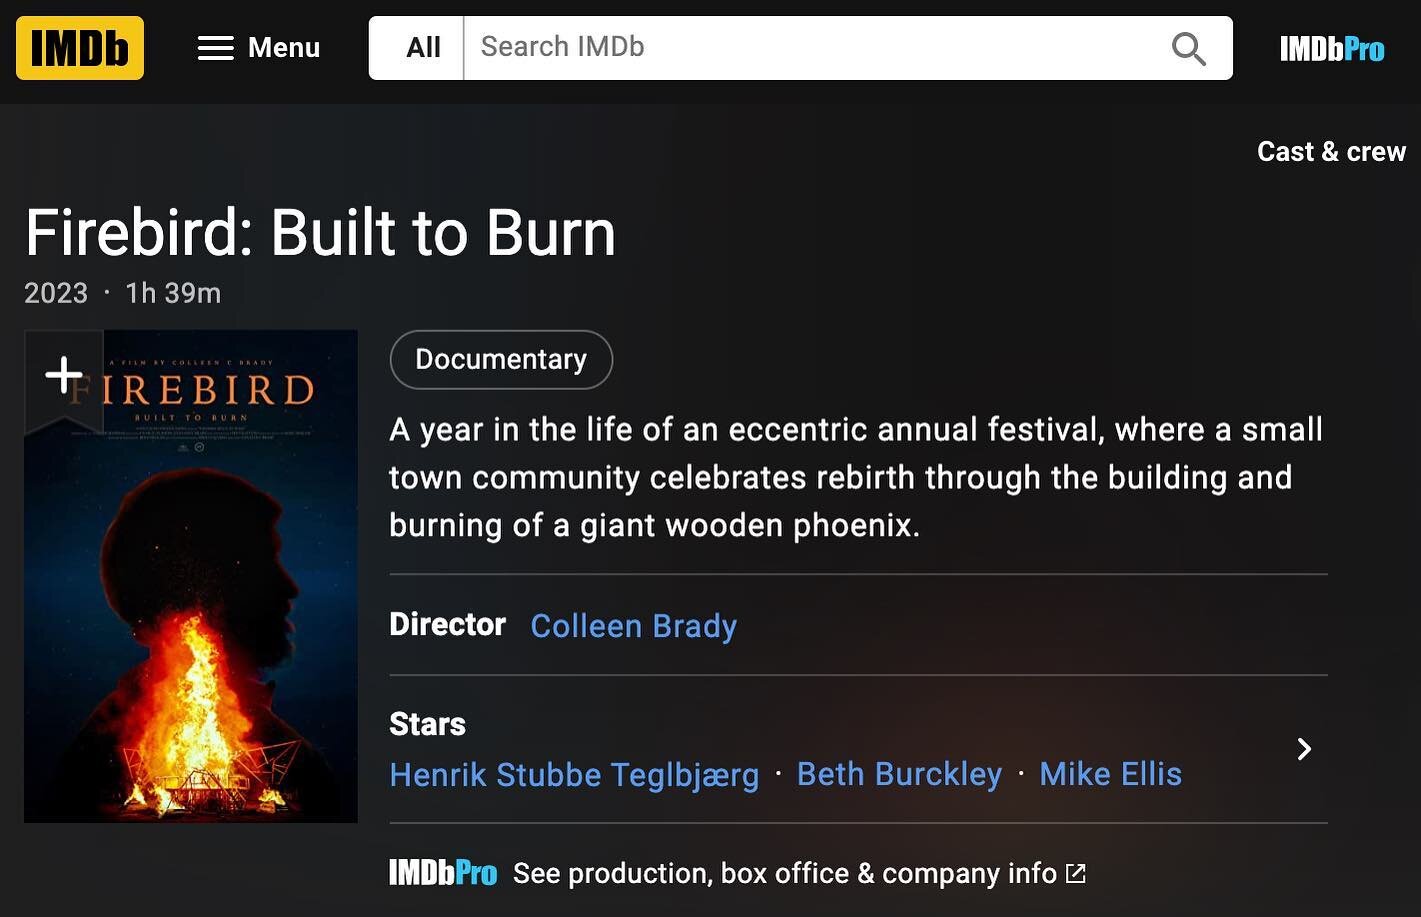 Woah look at this! Firebird: Built to Burn has an official IMDb page! We&rsquo;ll be updating the page with photos, trailers, fun trivia facts and more! Link in bio 🔥🔥
&bull;
&bull;
&bull;
#firebirddocumentary #firebirdfestival #phoenixvilleartist 